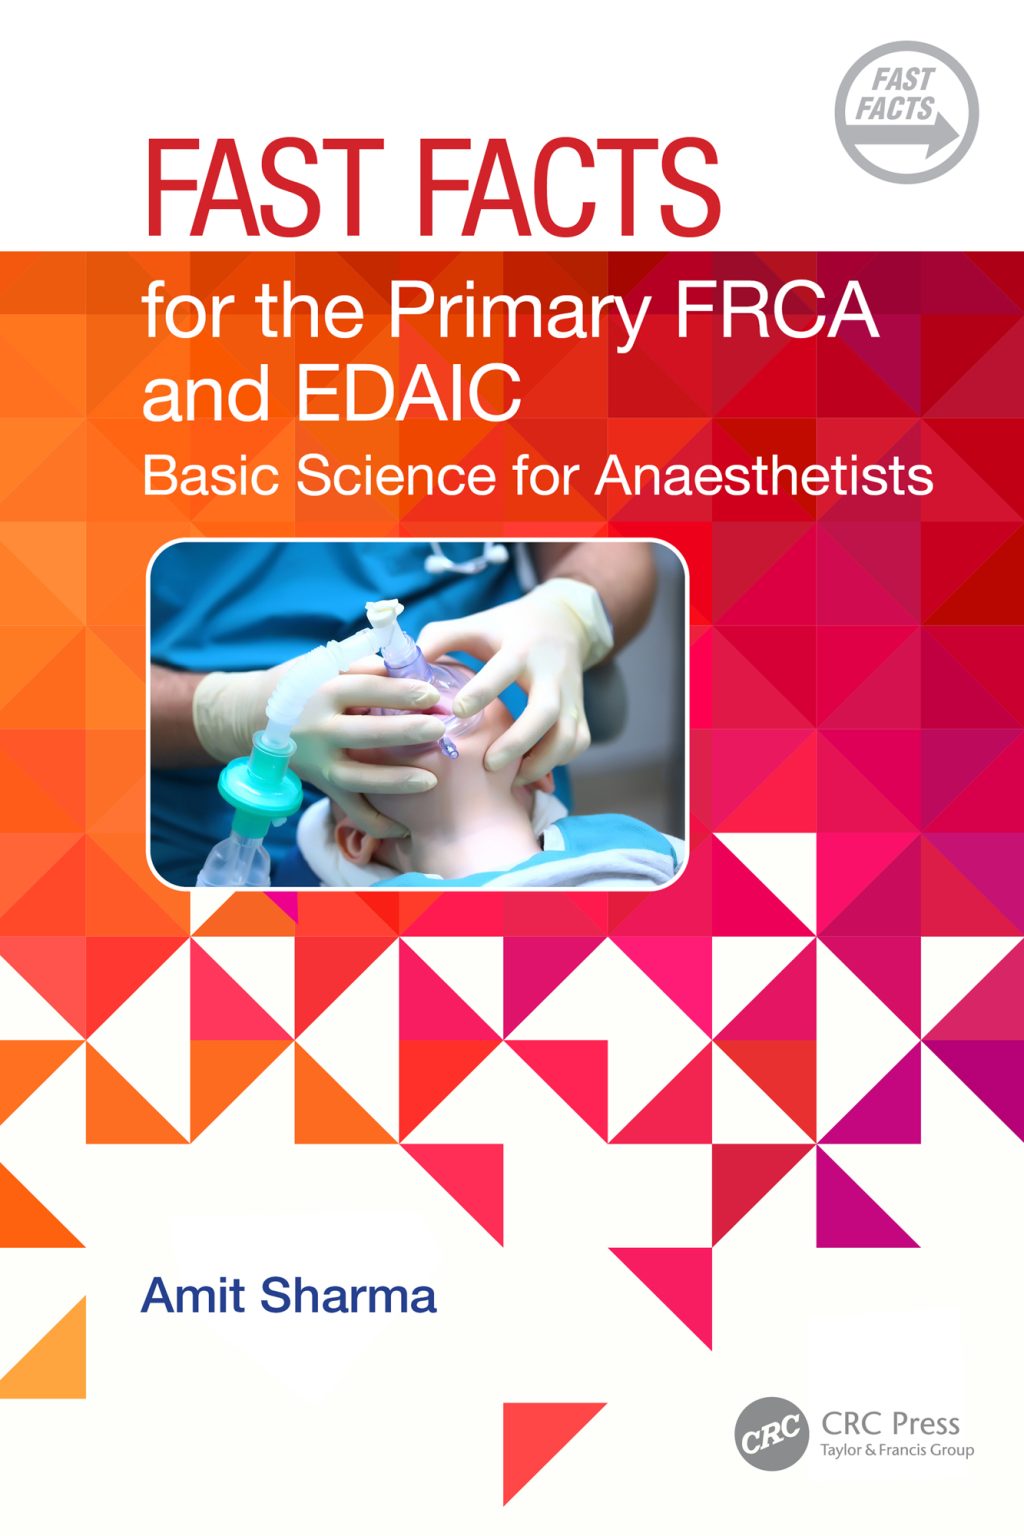 Fast Facts For The Primary FRCA And EDAIC Basic Science For Anaesthetists